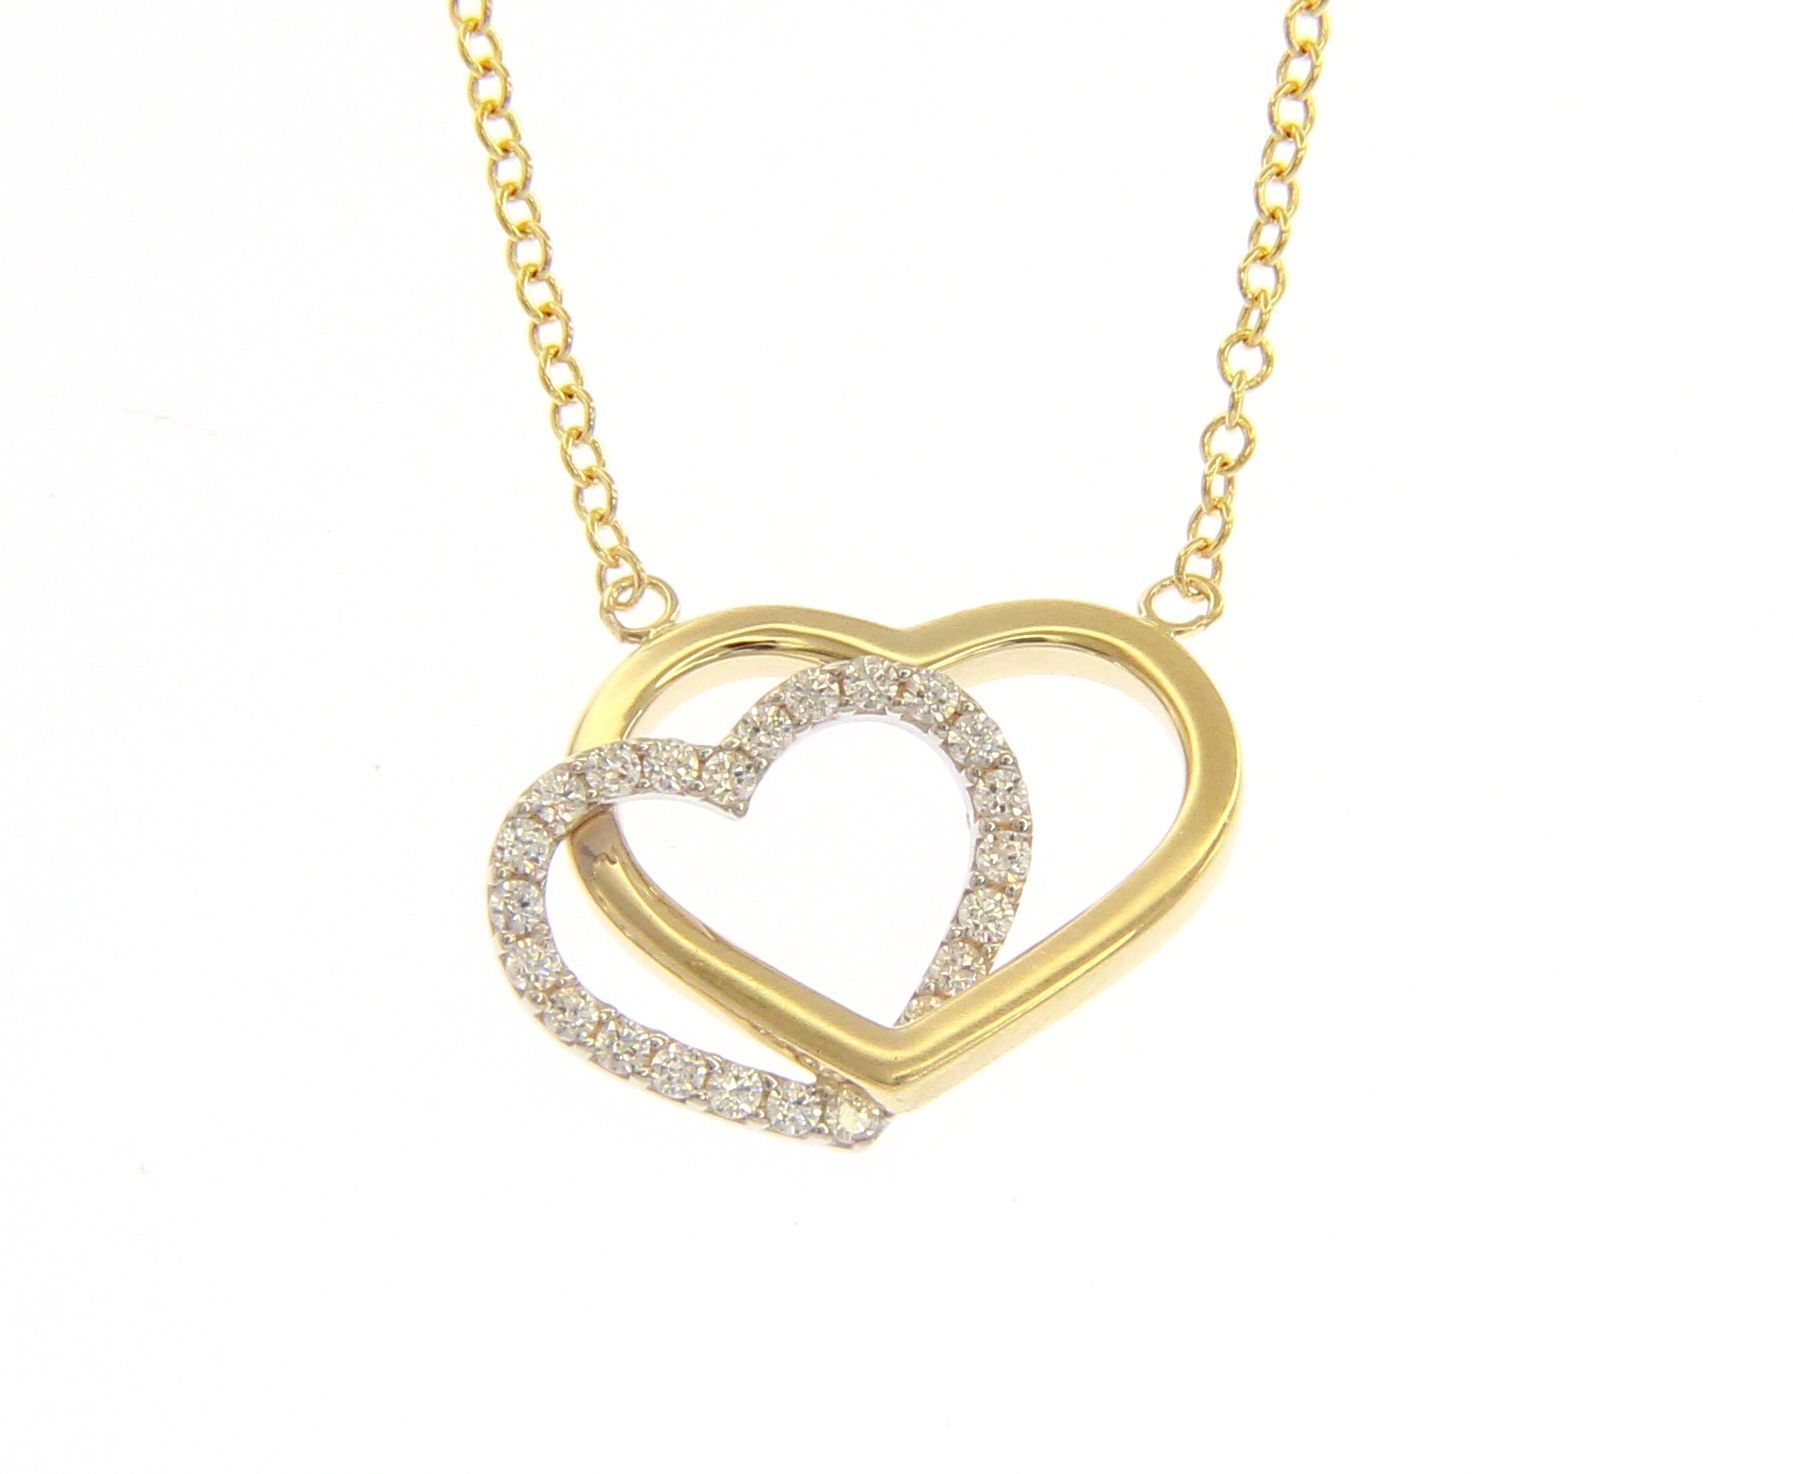 Golden necklace k9 with 2 hearts  (code S203352)